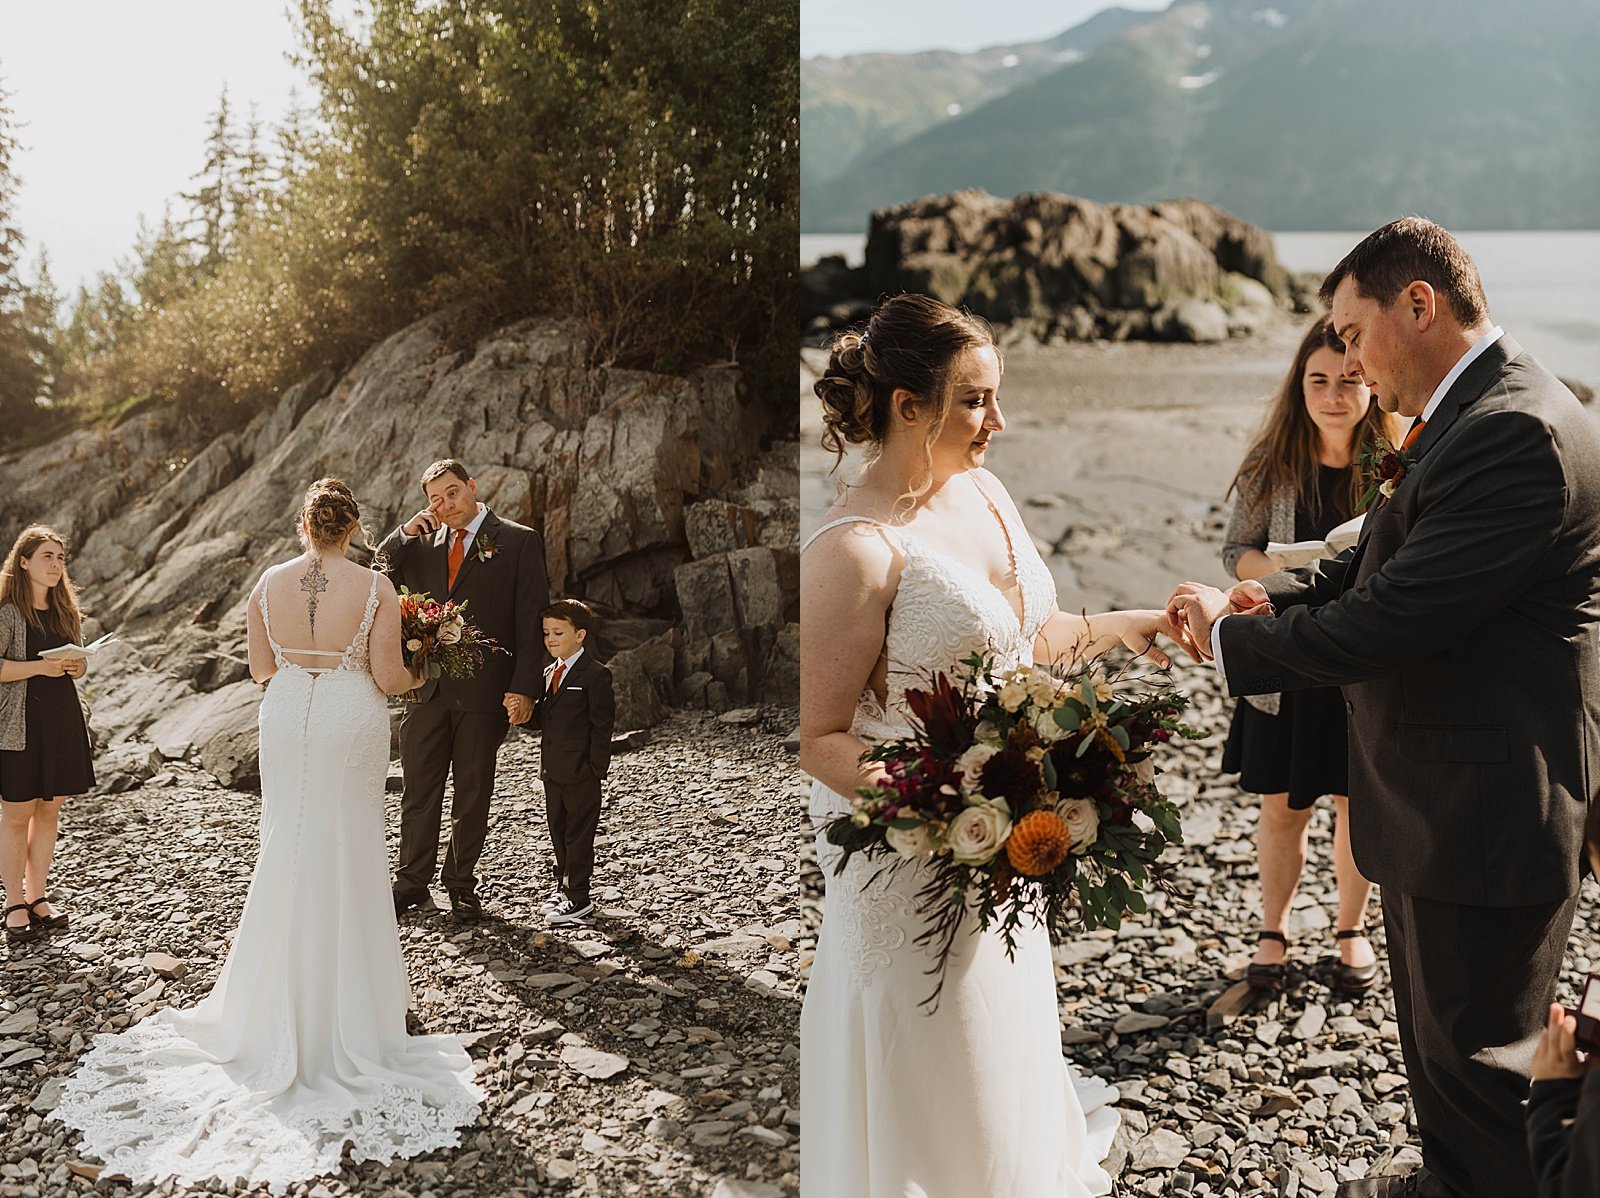  Bride and groom reading vows to each other during intimate beachside wedding in Alaska 